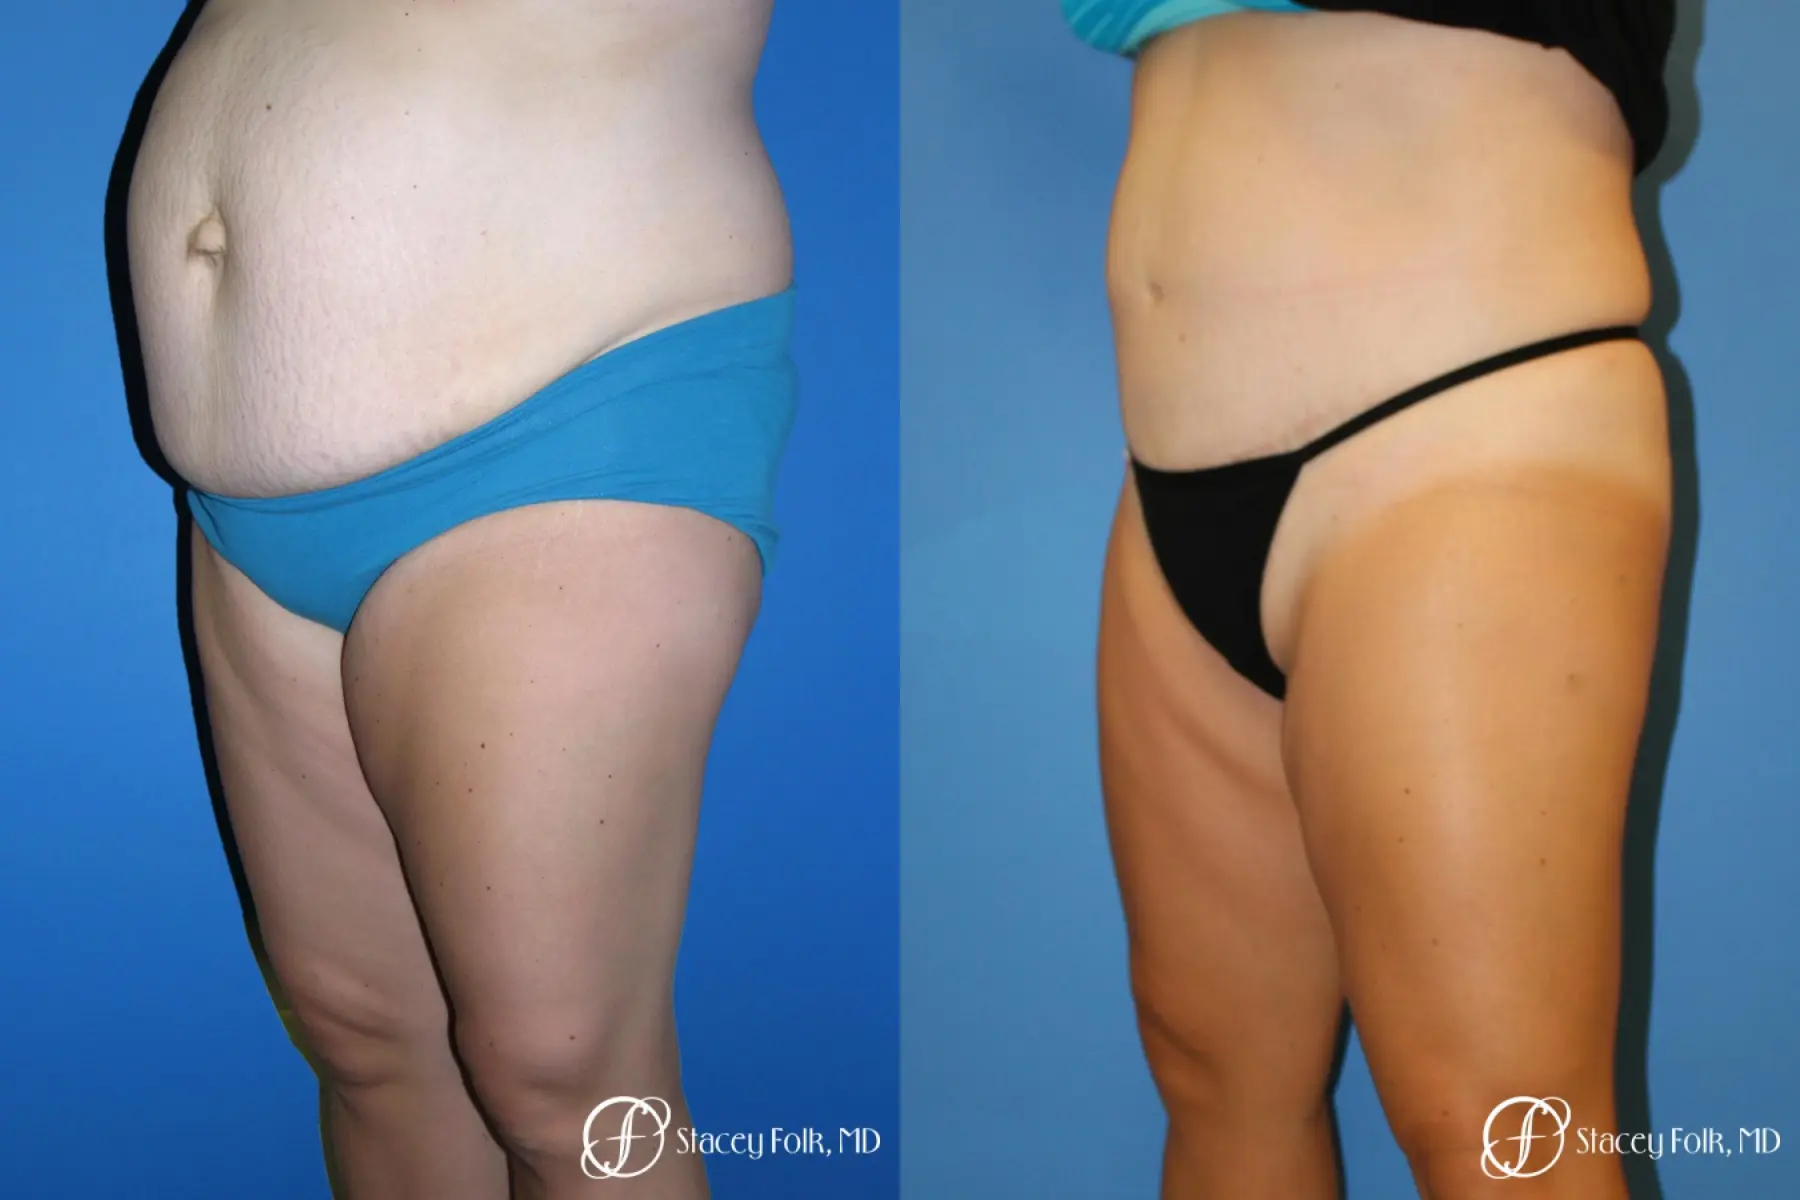 Tummy Tuck Before & After Gallery: Patient 1